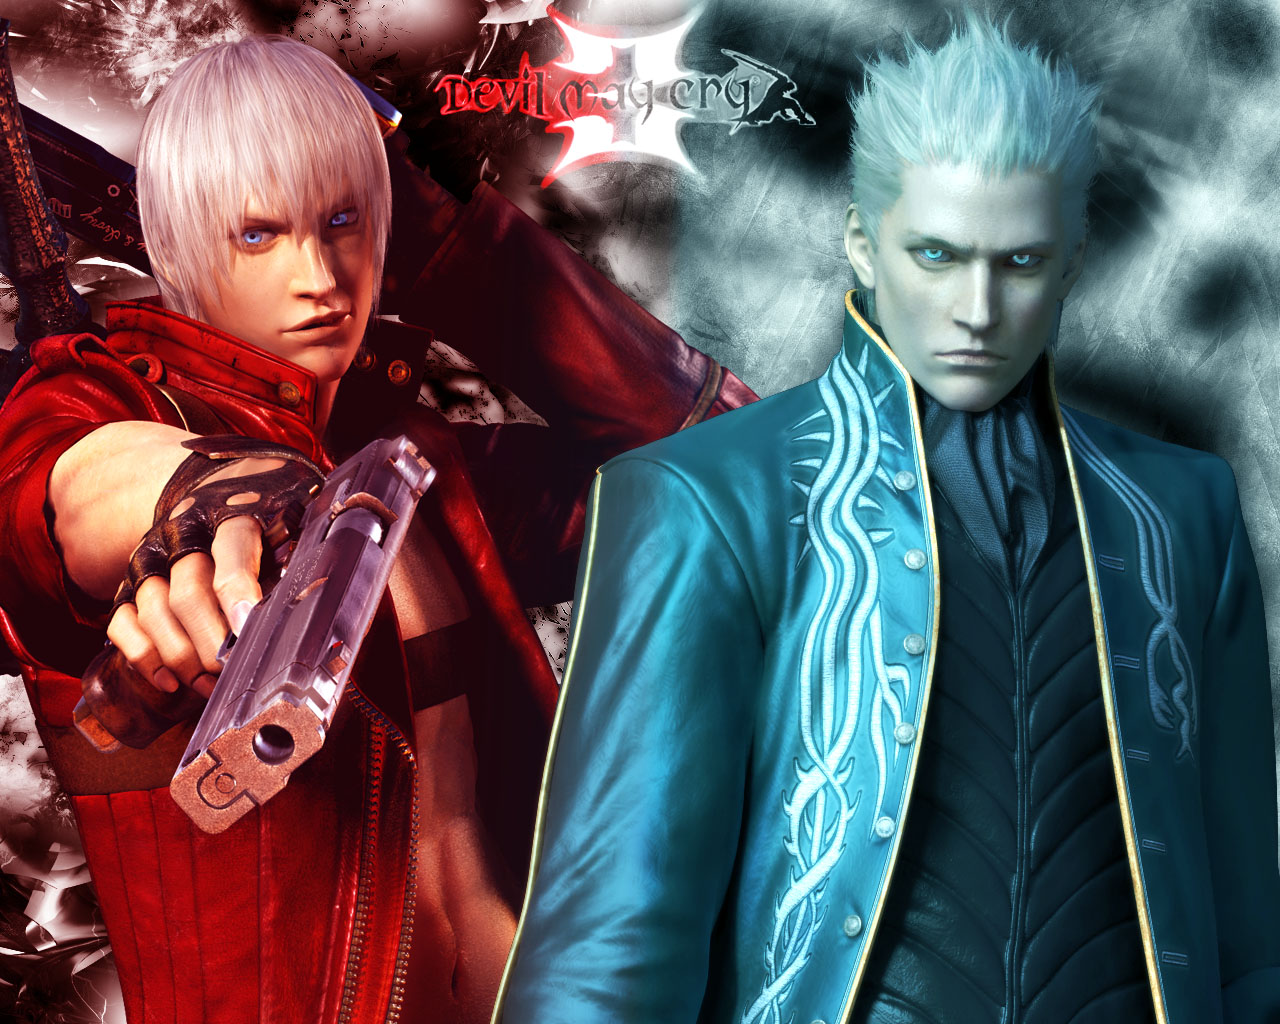 Games devil may cry. Данте Devil May Cry. DMC 3. Данте ДМС 3. Данте Devil May Cry 3.